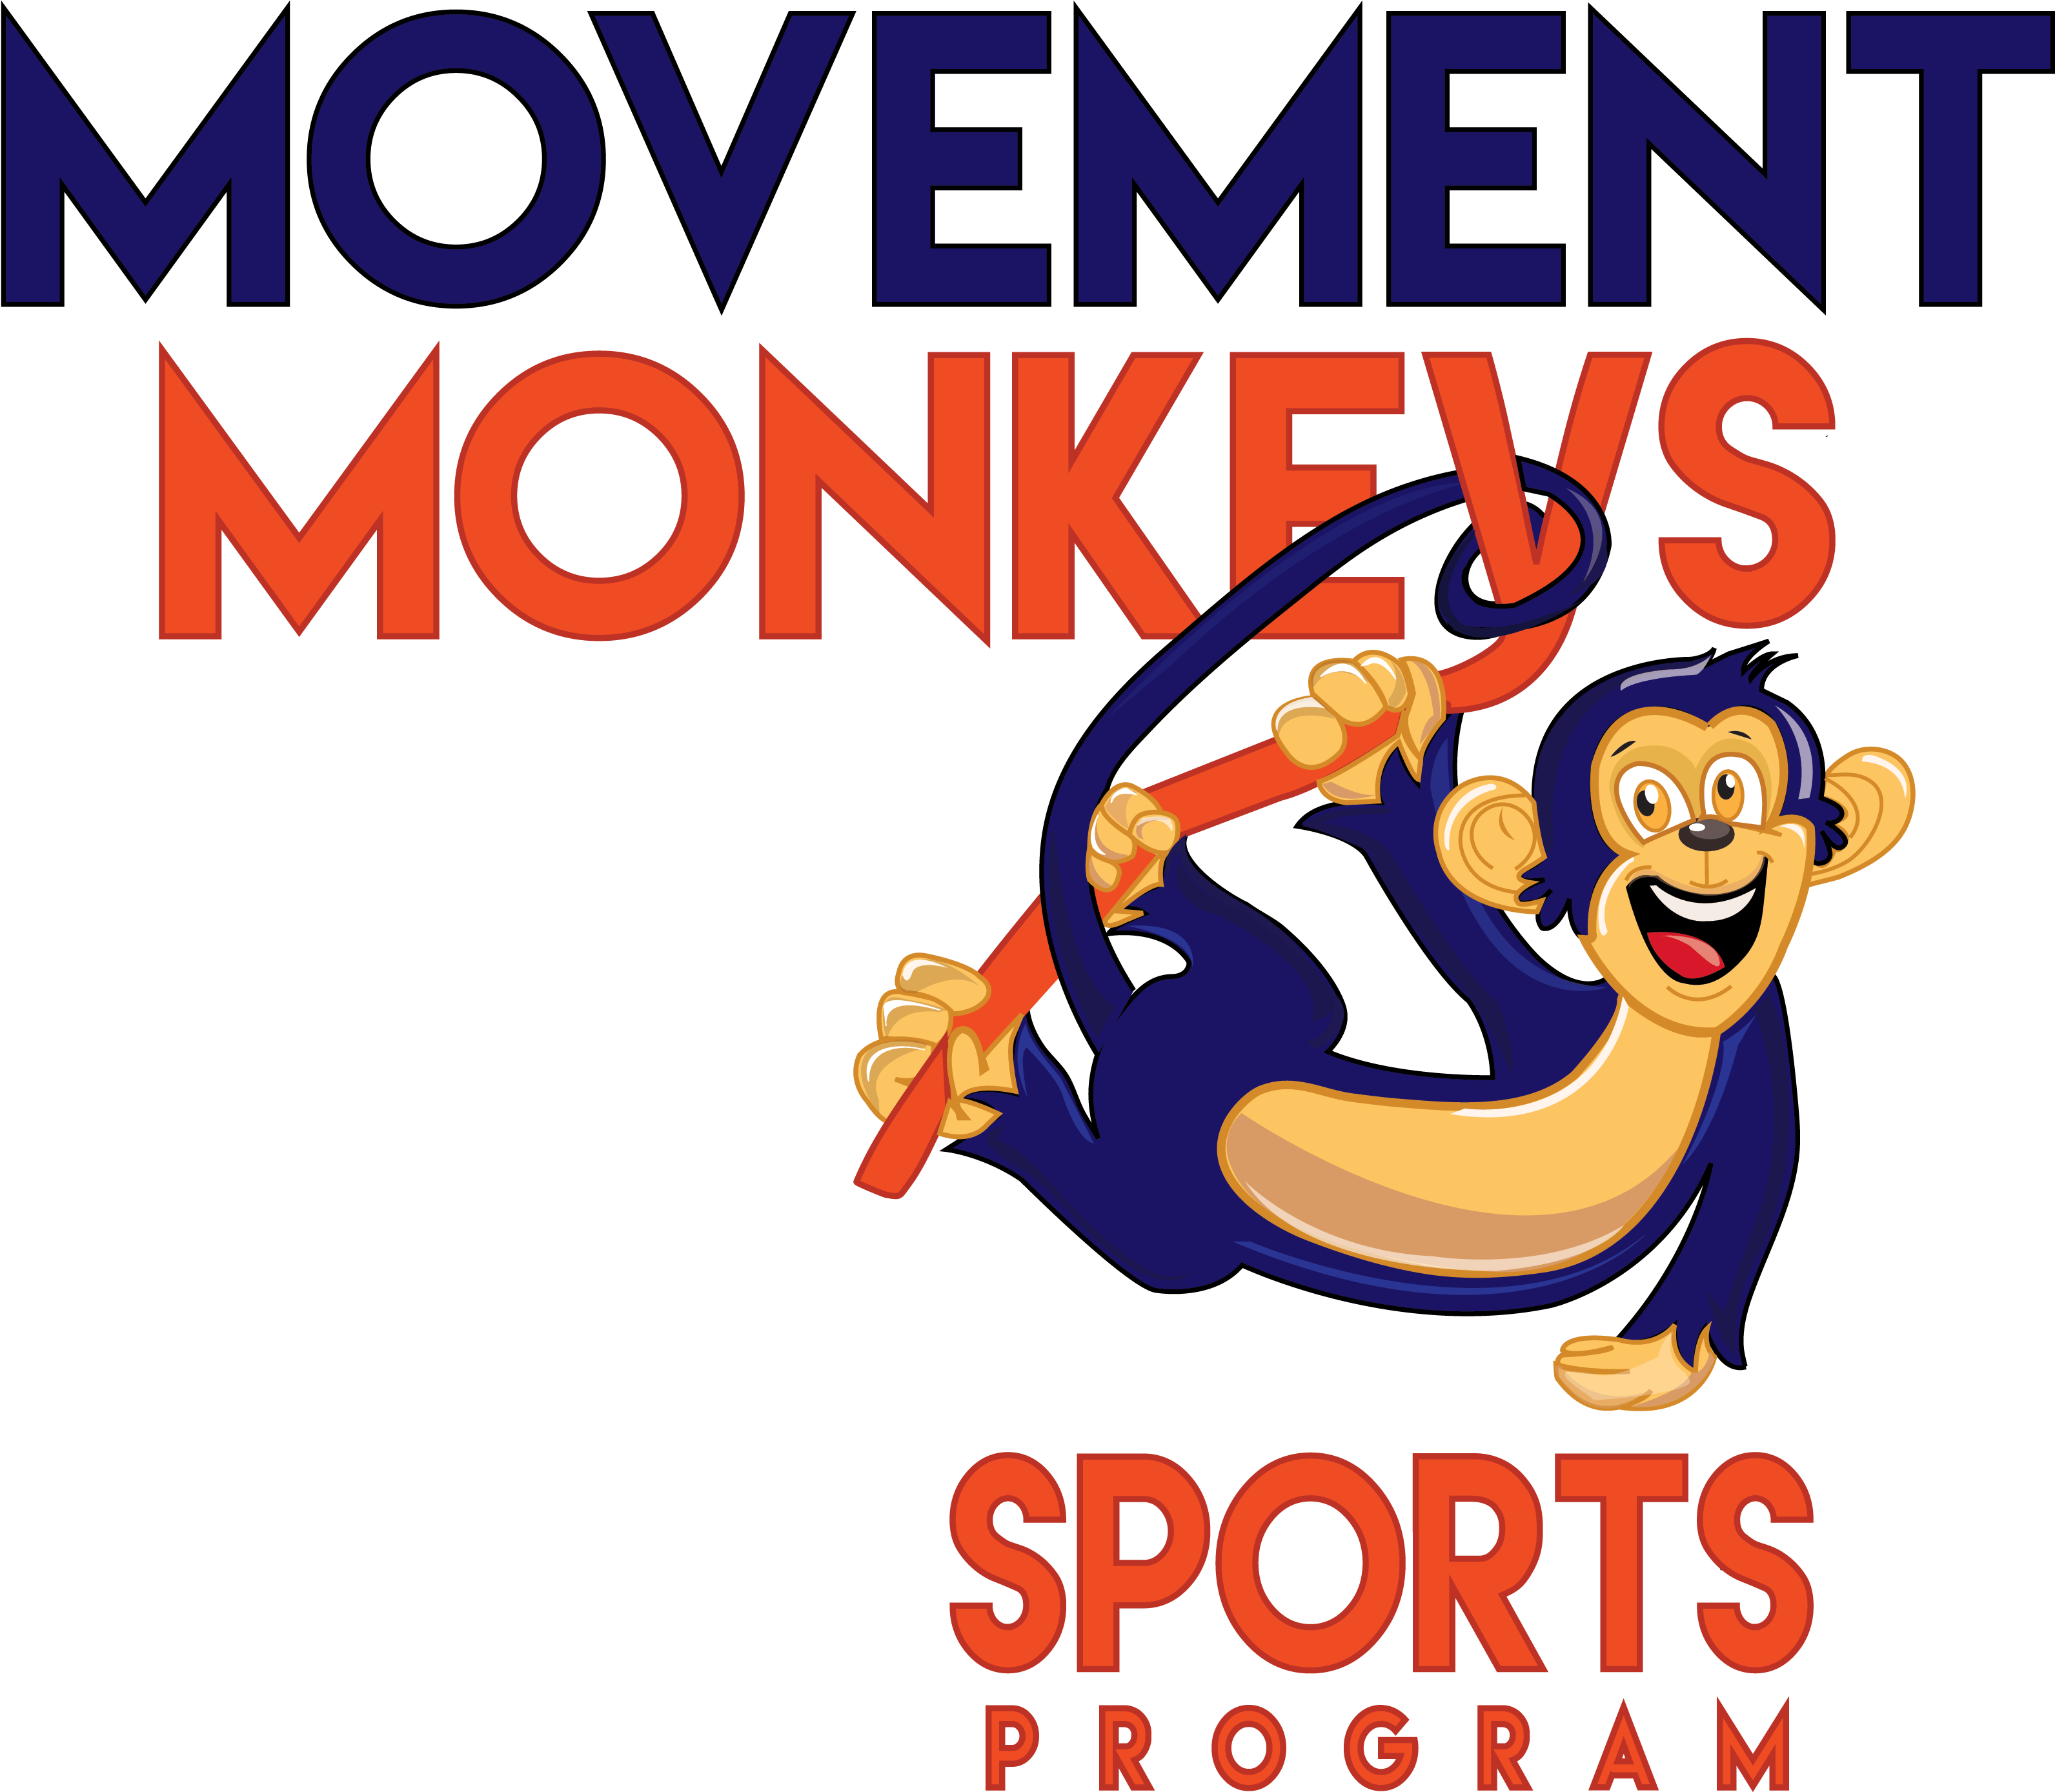 Want Our Program In Your Area Let Us Know Where - Movement Monkeys Sports Program (3528x3078)